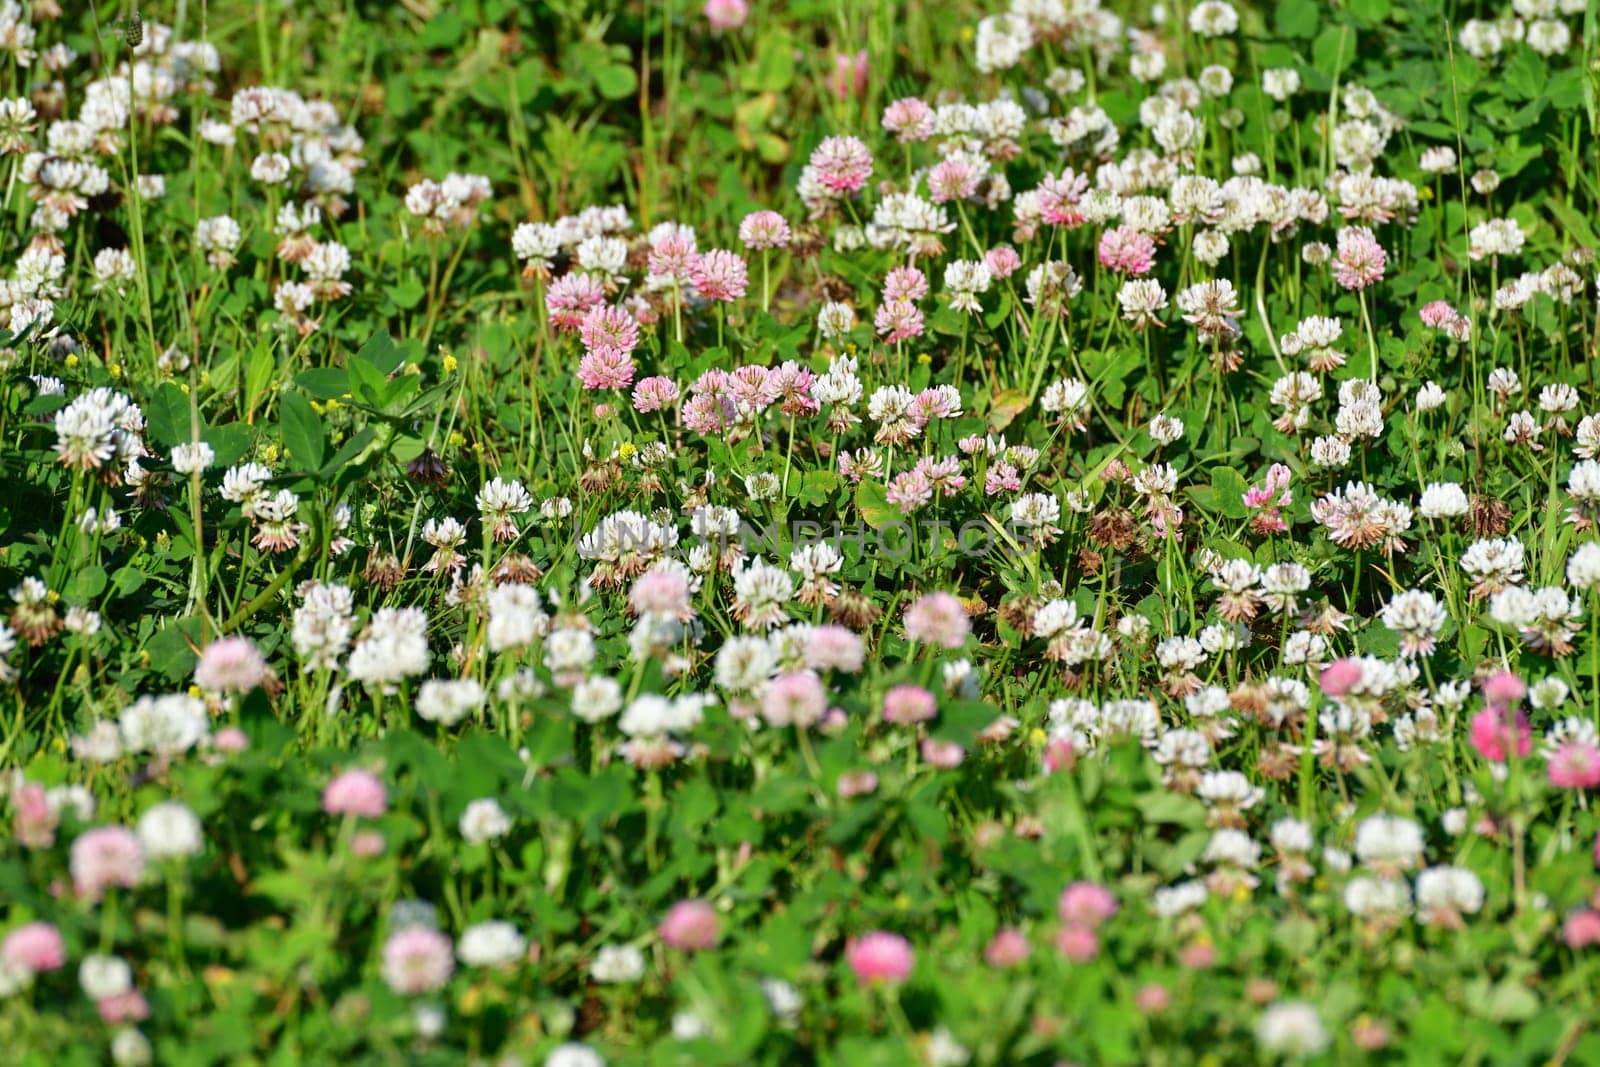 Clover blooms with white and pink flowers. A wild meadow